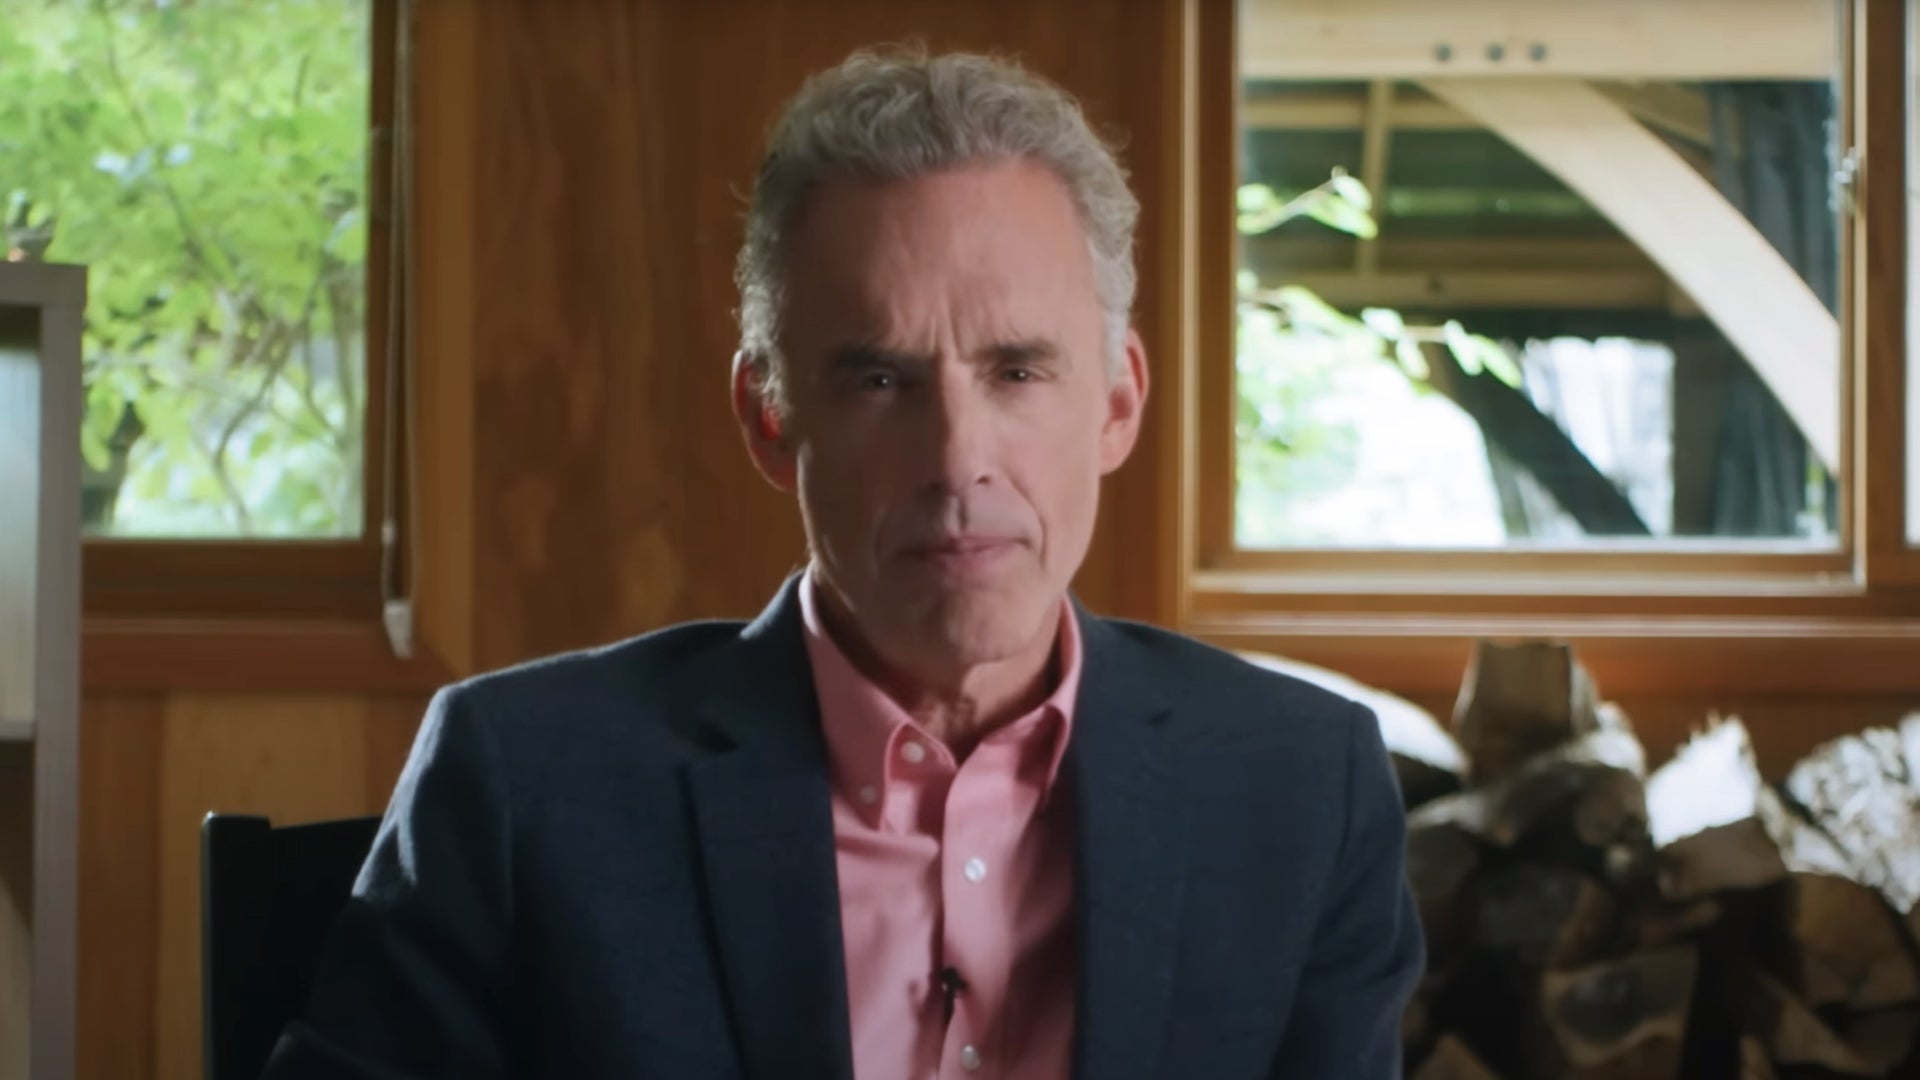 Psychologist Jordan Peterson Says Is Harming Boys, and the Church Must Save Them: 'That's Your Holy Duty' | CBN News